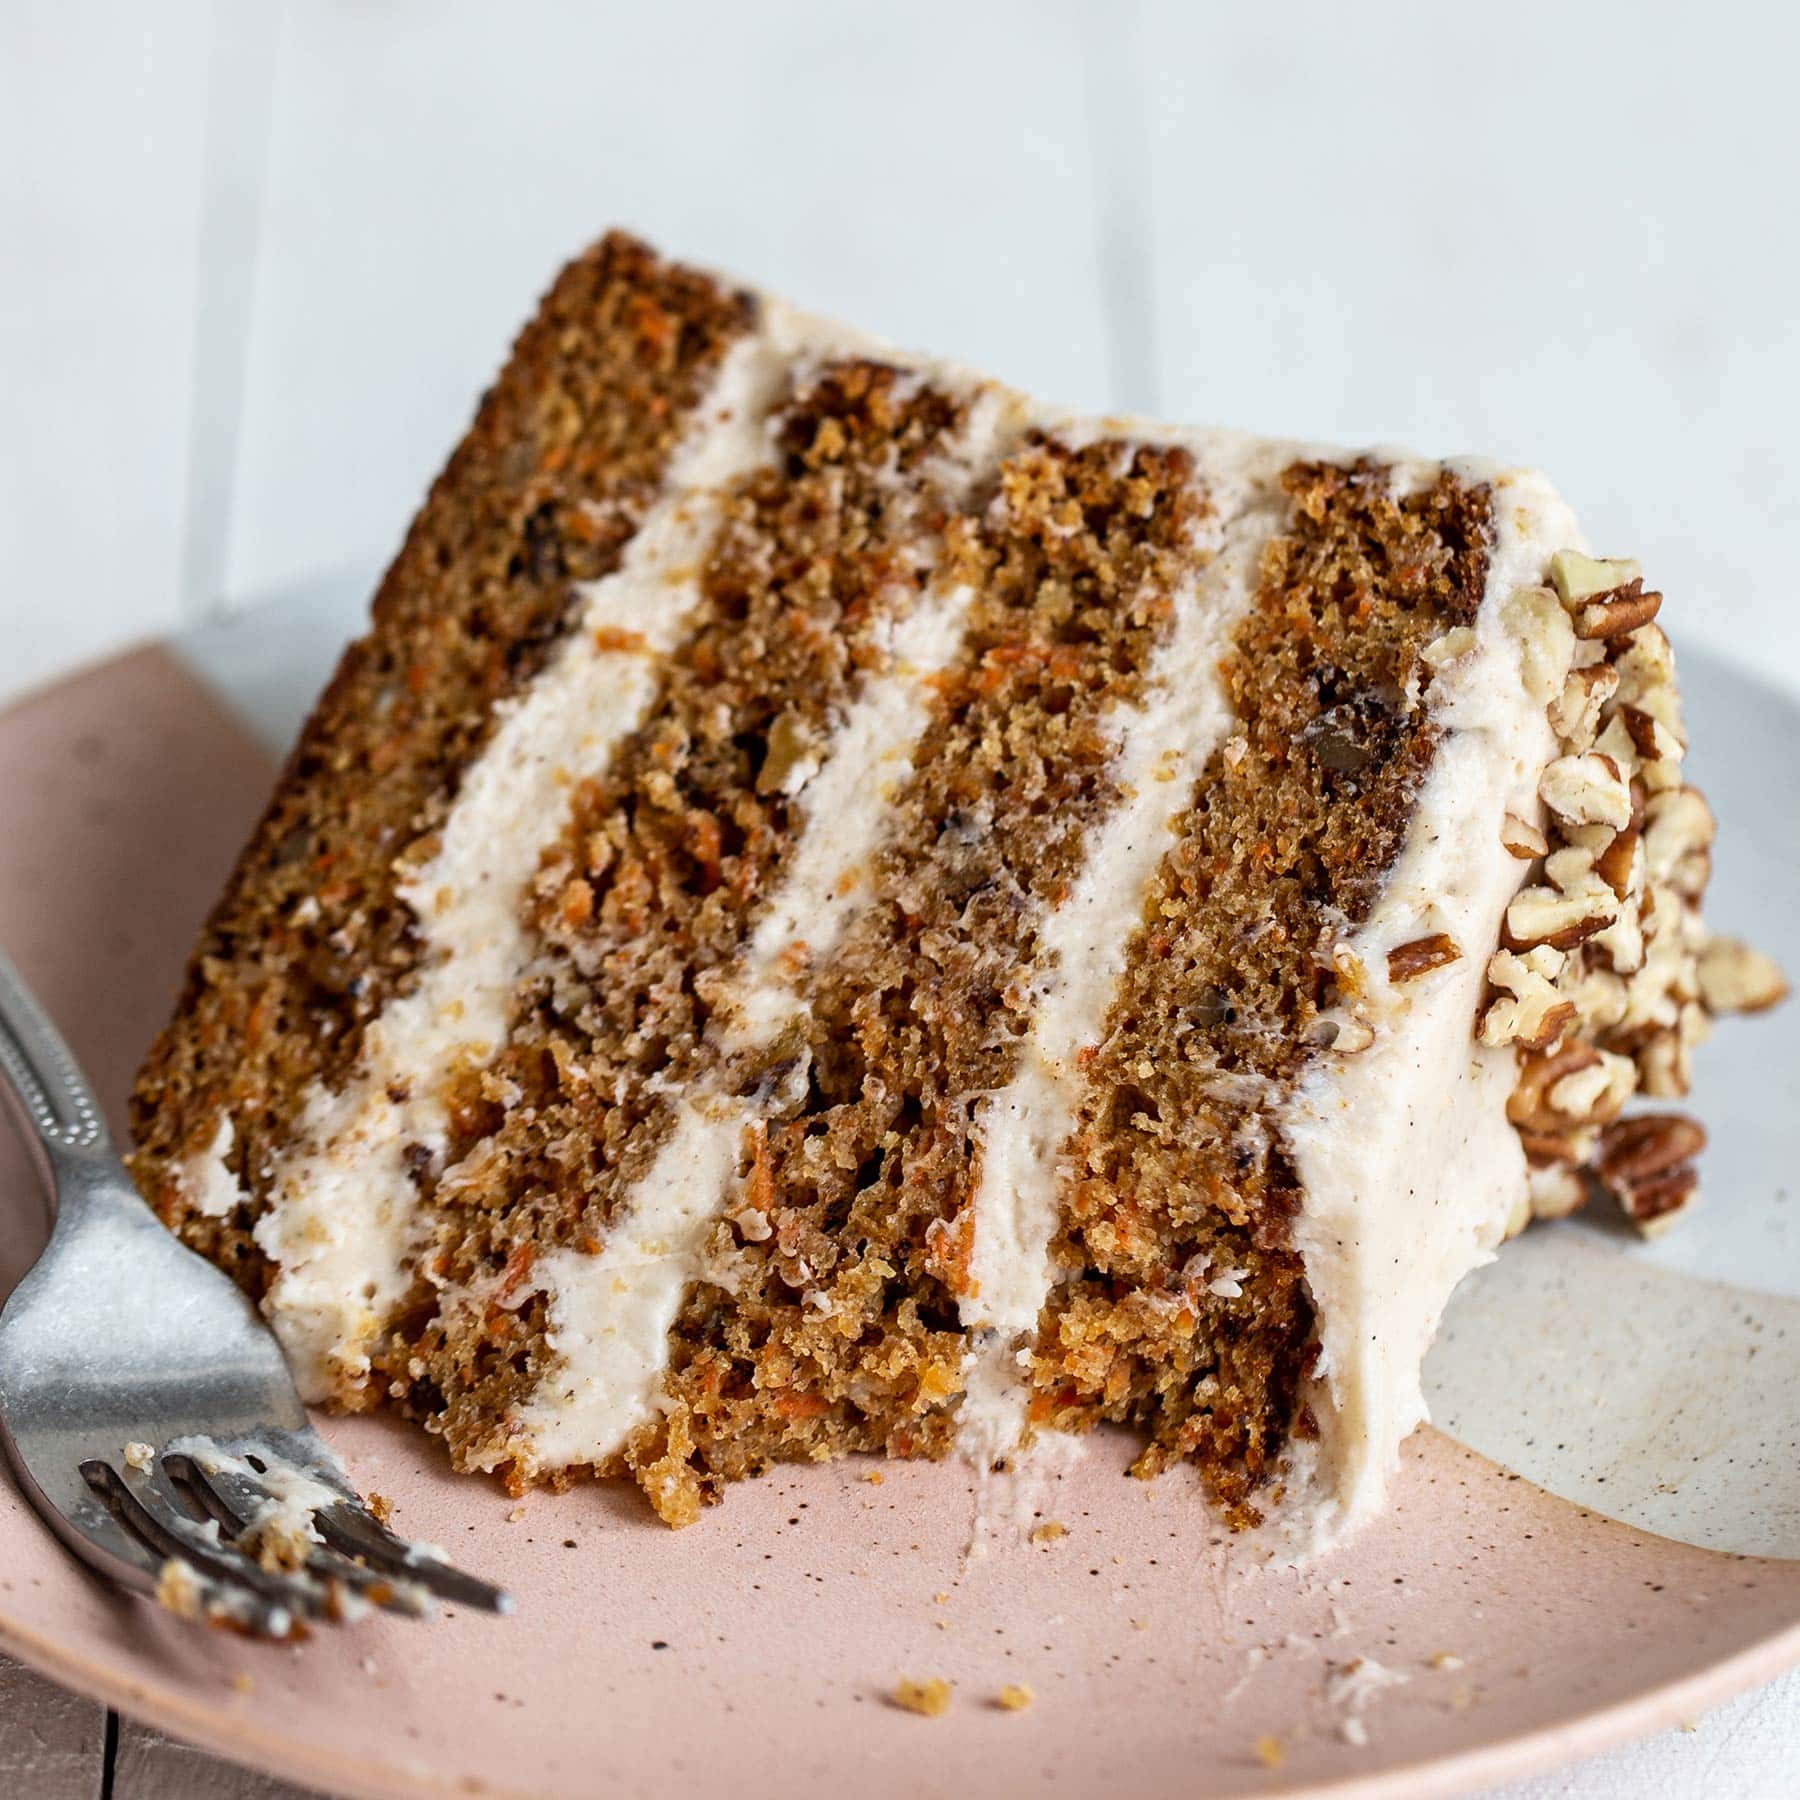 Slice of four layer brown butter carrot cake with cream cheese frosting on a plate with a forkful taken out